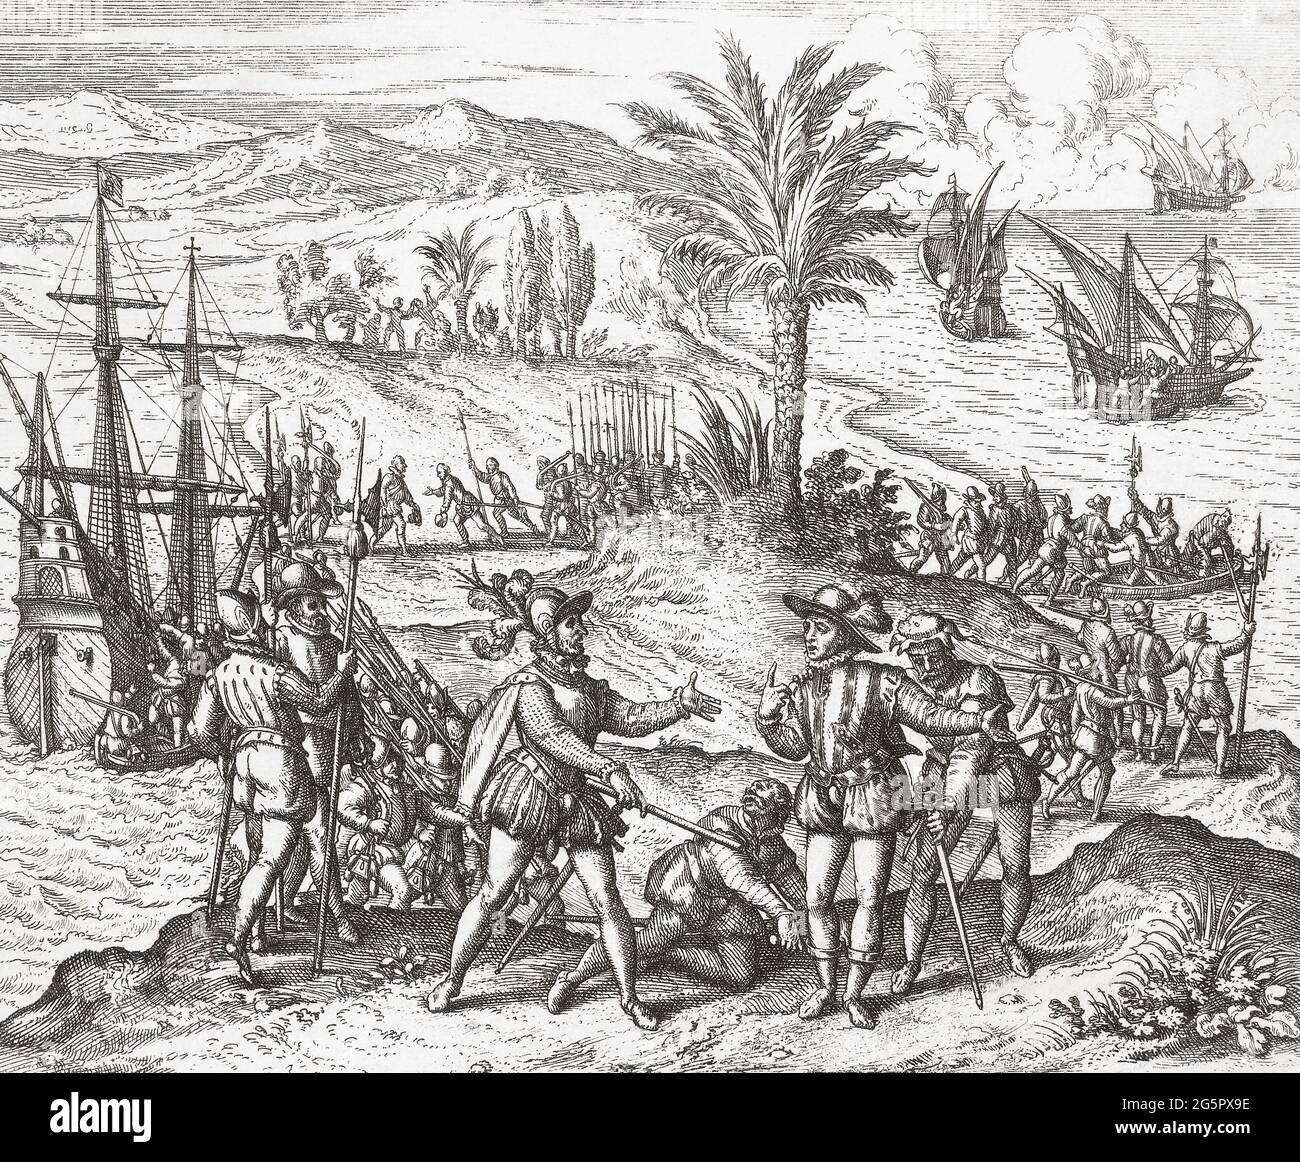 Christopher Columbus is arrested by order of the Spanish Crown before being sent back to Spain in chains to face charges of incompetance and brutality during his tenure as governor of the Indies.  Christopher Columbus, 1451 - 1506.  Italian explorer and navigator.  After a late 16th century work by Theodor de Bry. Stock Photo